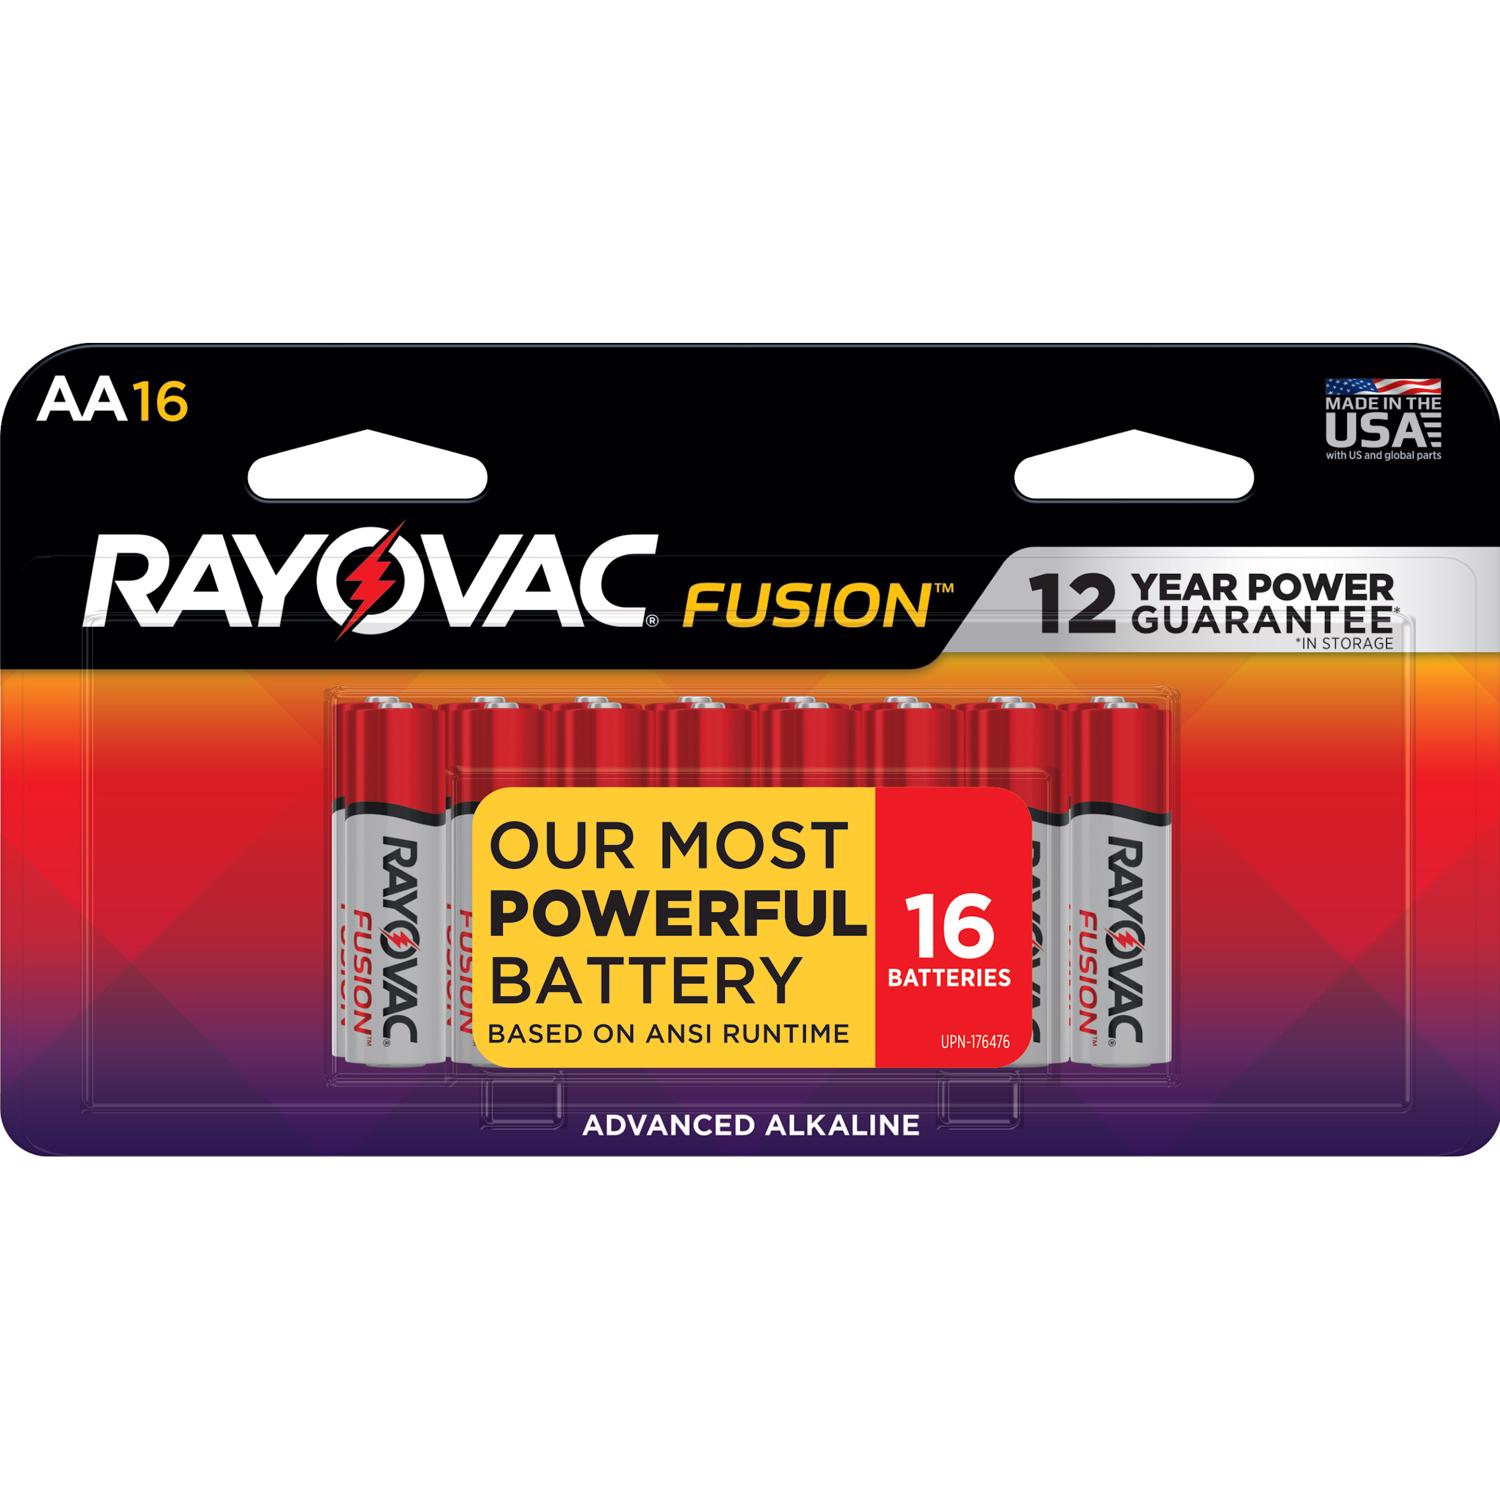 Photos - Household Switch Rayovac Fusion AA Alkaline Batteries 16 pk Carded 815-16LTFUSK 